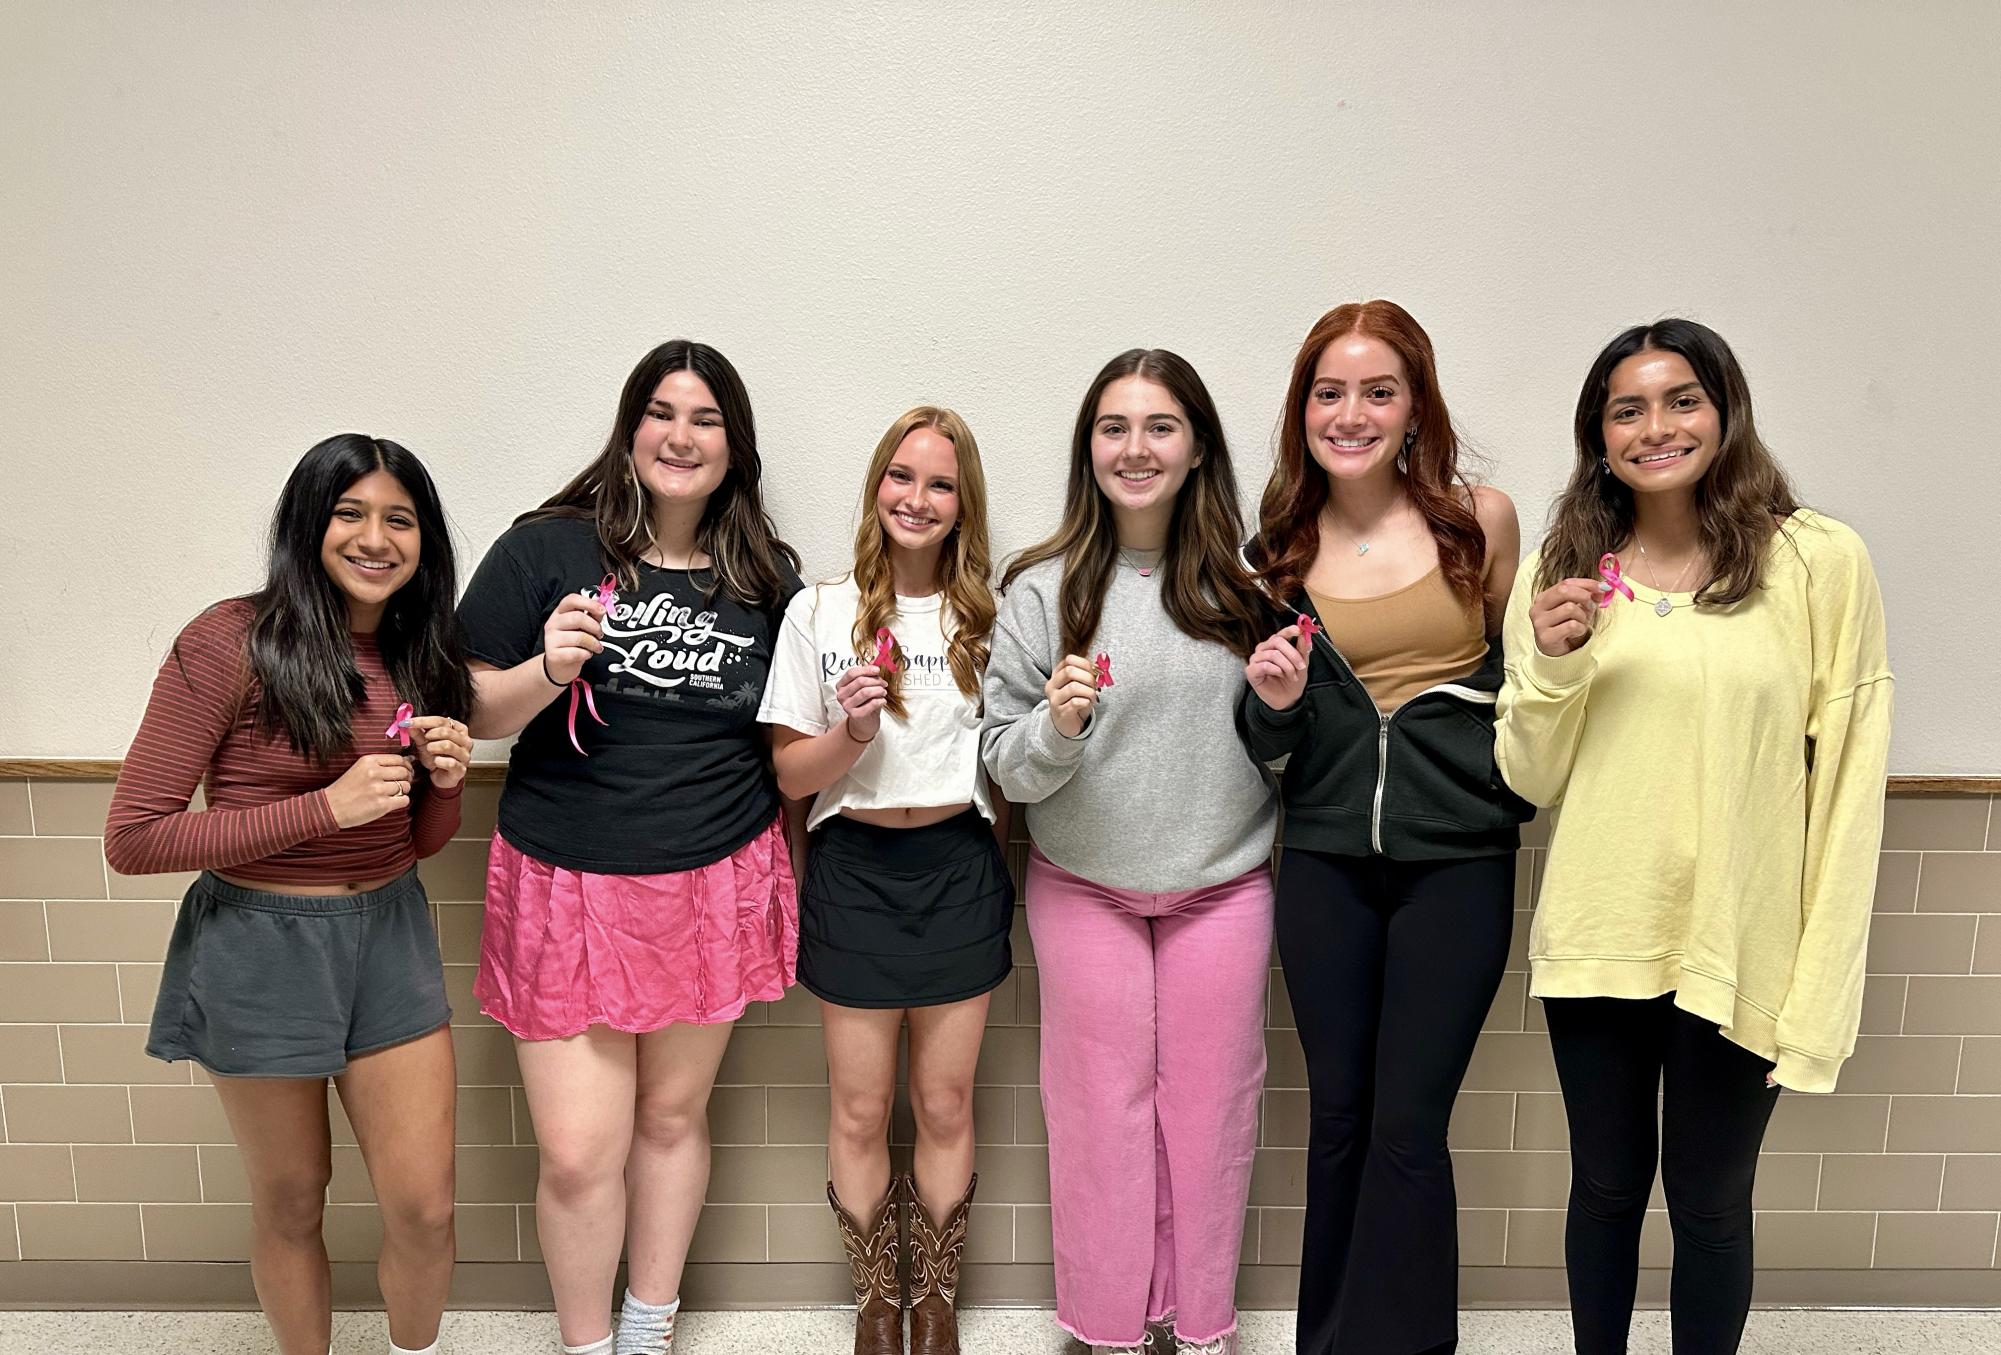 Girls 4 The Future members with their breast cancer awareness ribbons made at their October meeting. 
Left to right: Nikki Allaru, Madelyn Emmett, Lindsay Brill, Presley Sockwell, Sarah Banks, Zahra Hussain.